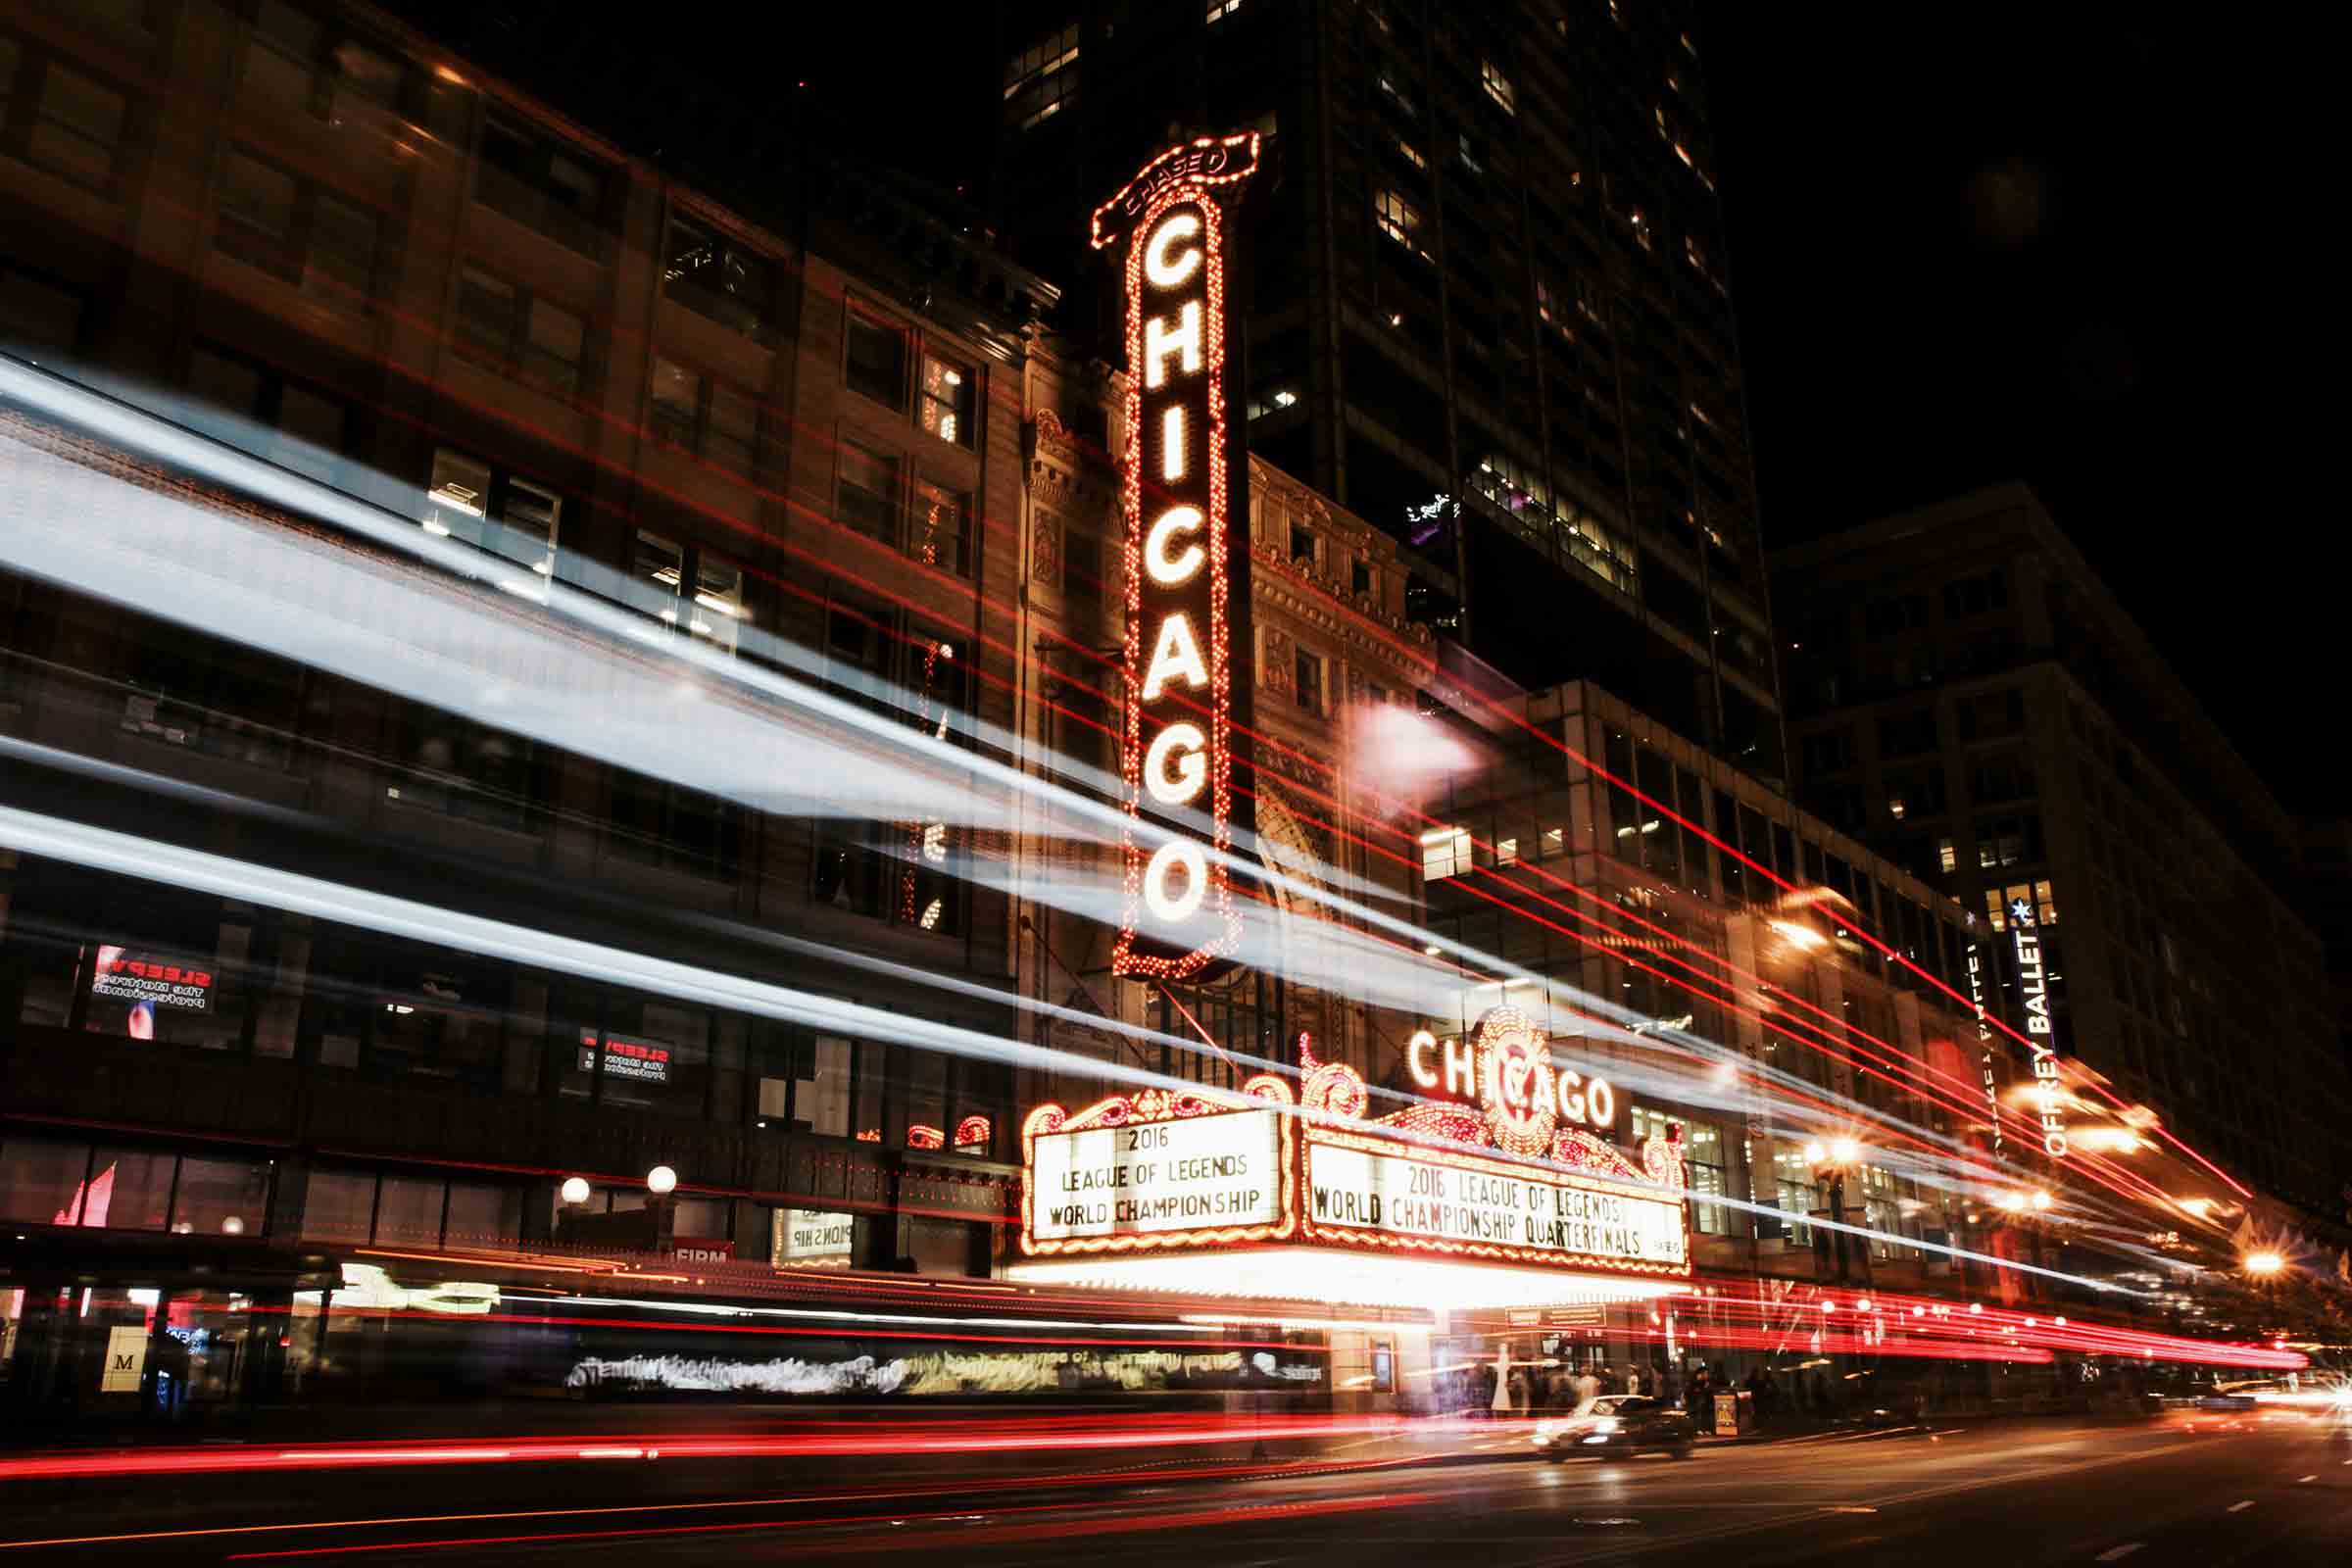 Chicago Theater at night